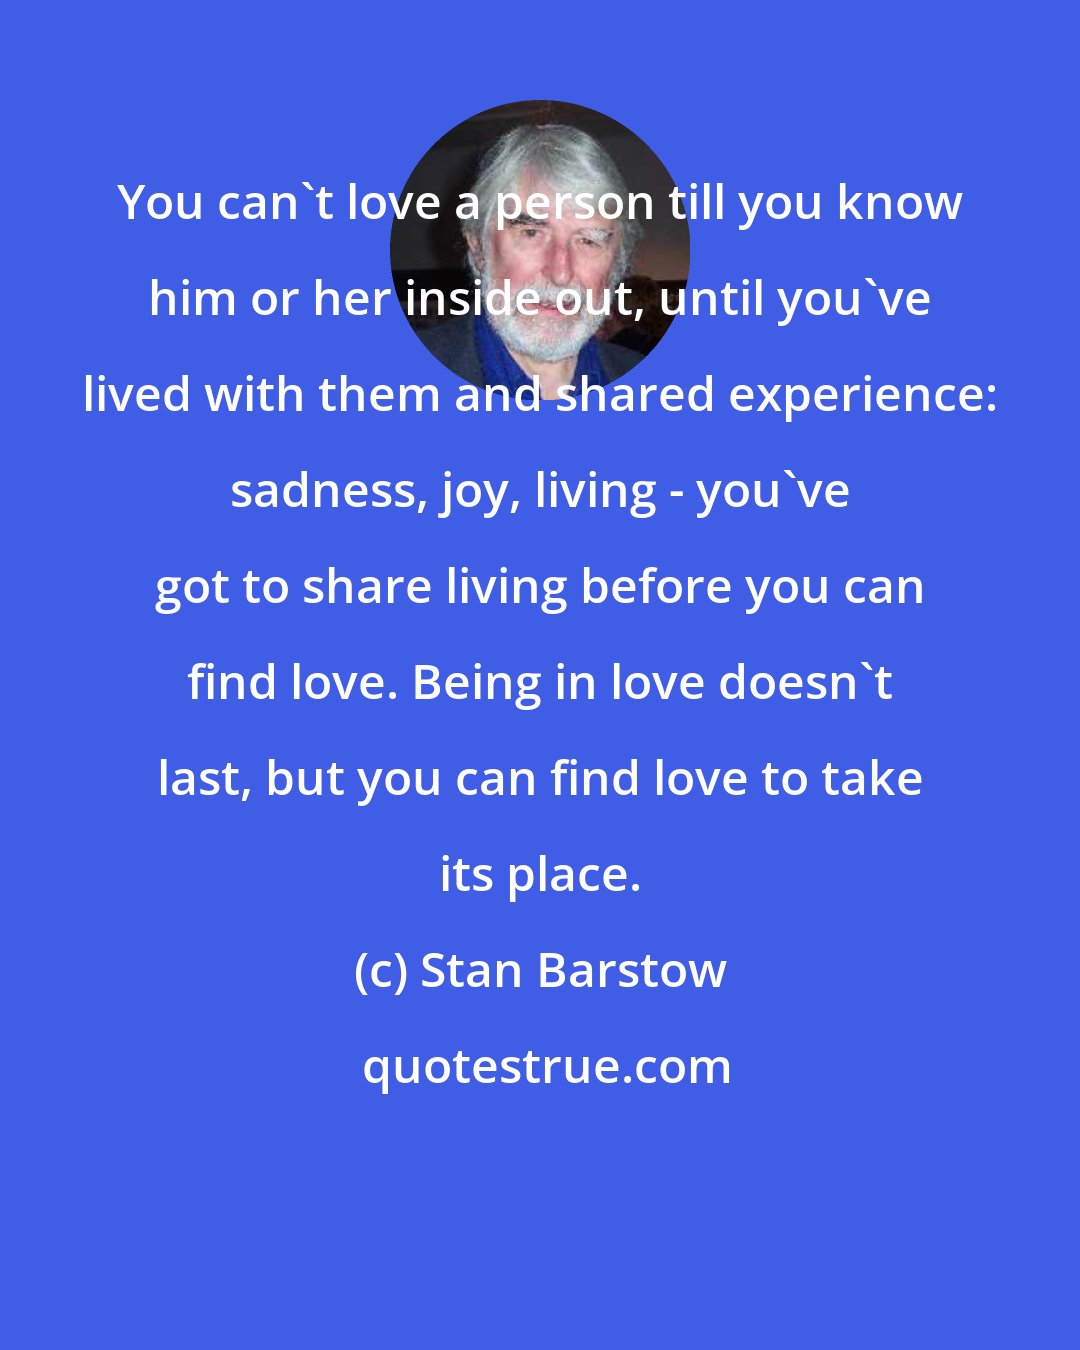 Stan Barstow: You can't love a person till you know him or her inside out, until you've lived with them and shared experience: sadness, joy, living - you've got to share living before you can find love. Being in love doesn't last, but you can find love to take its place.